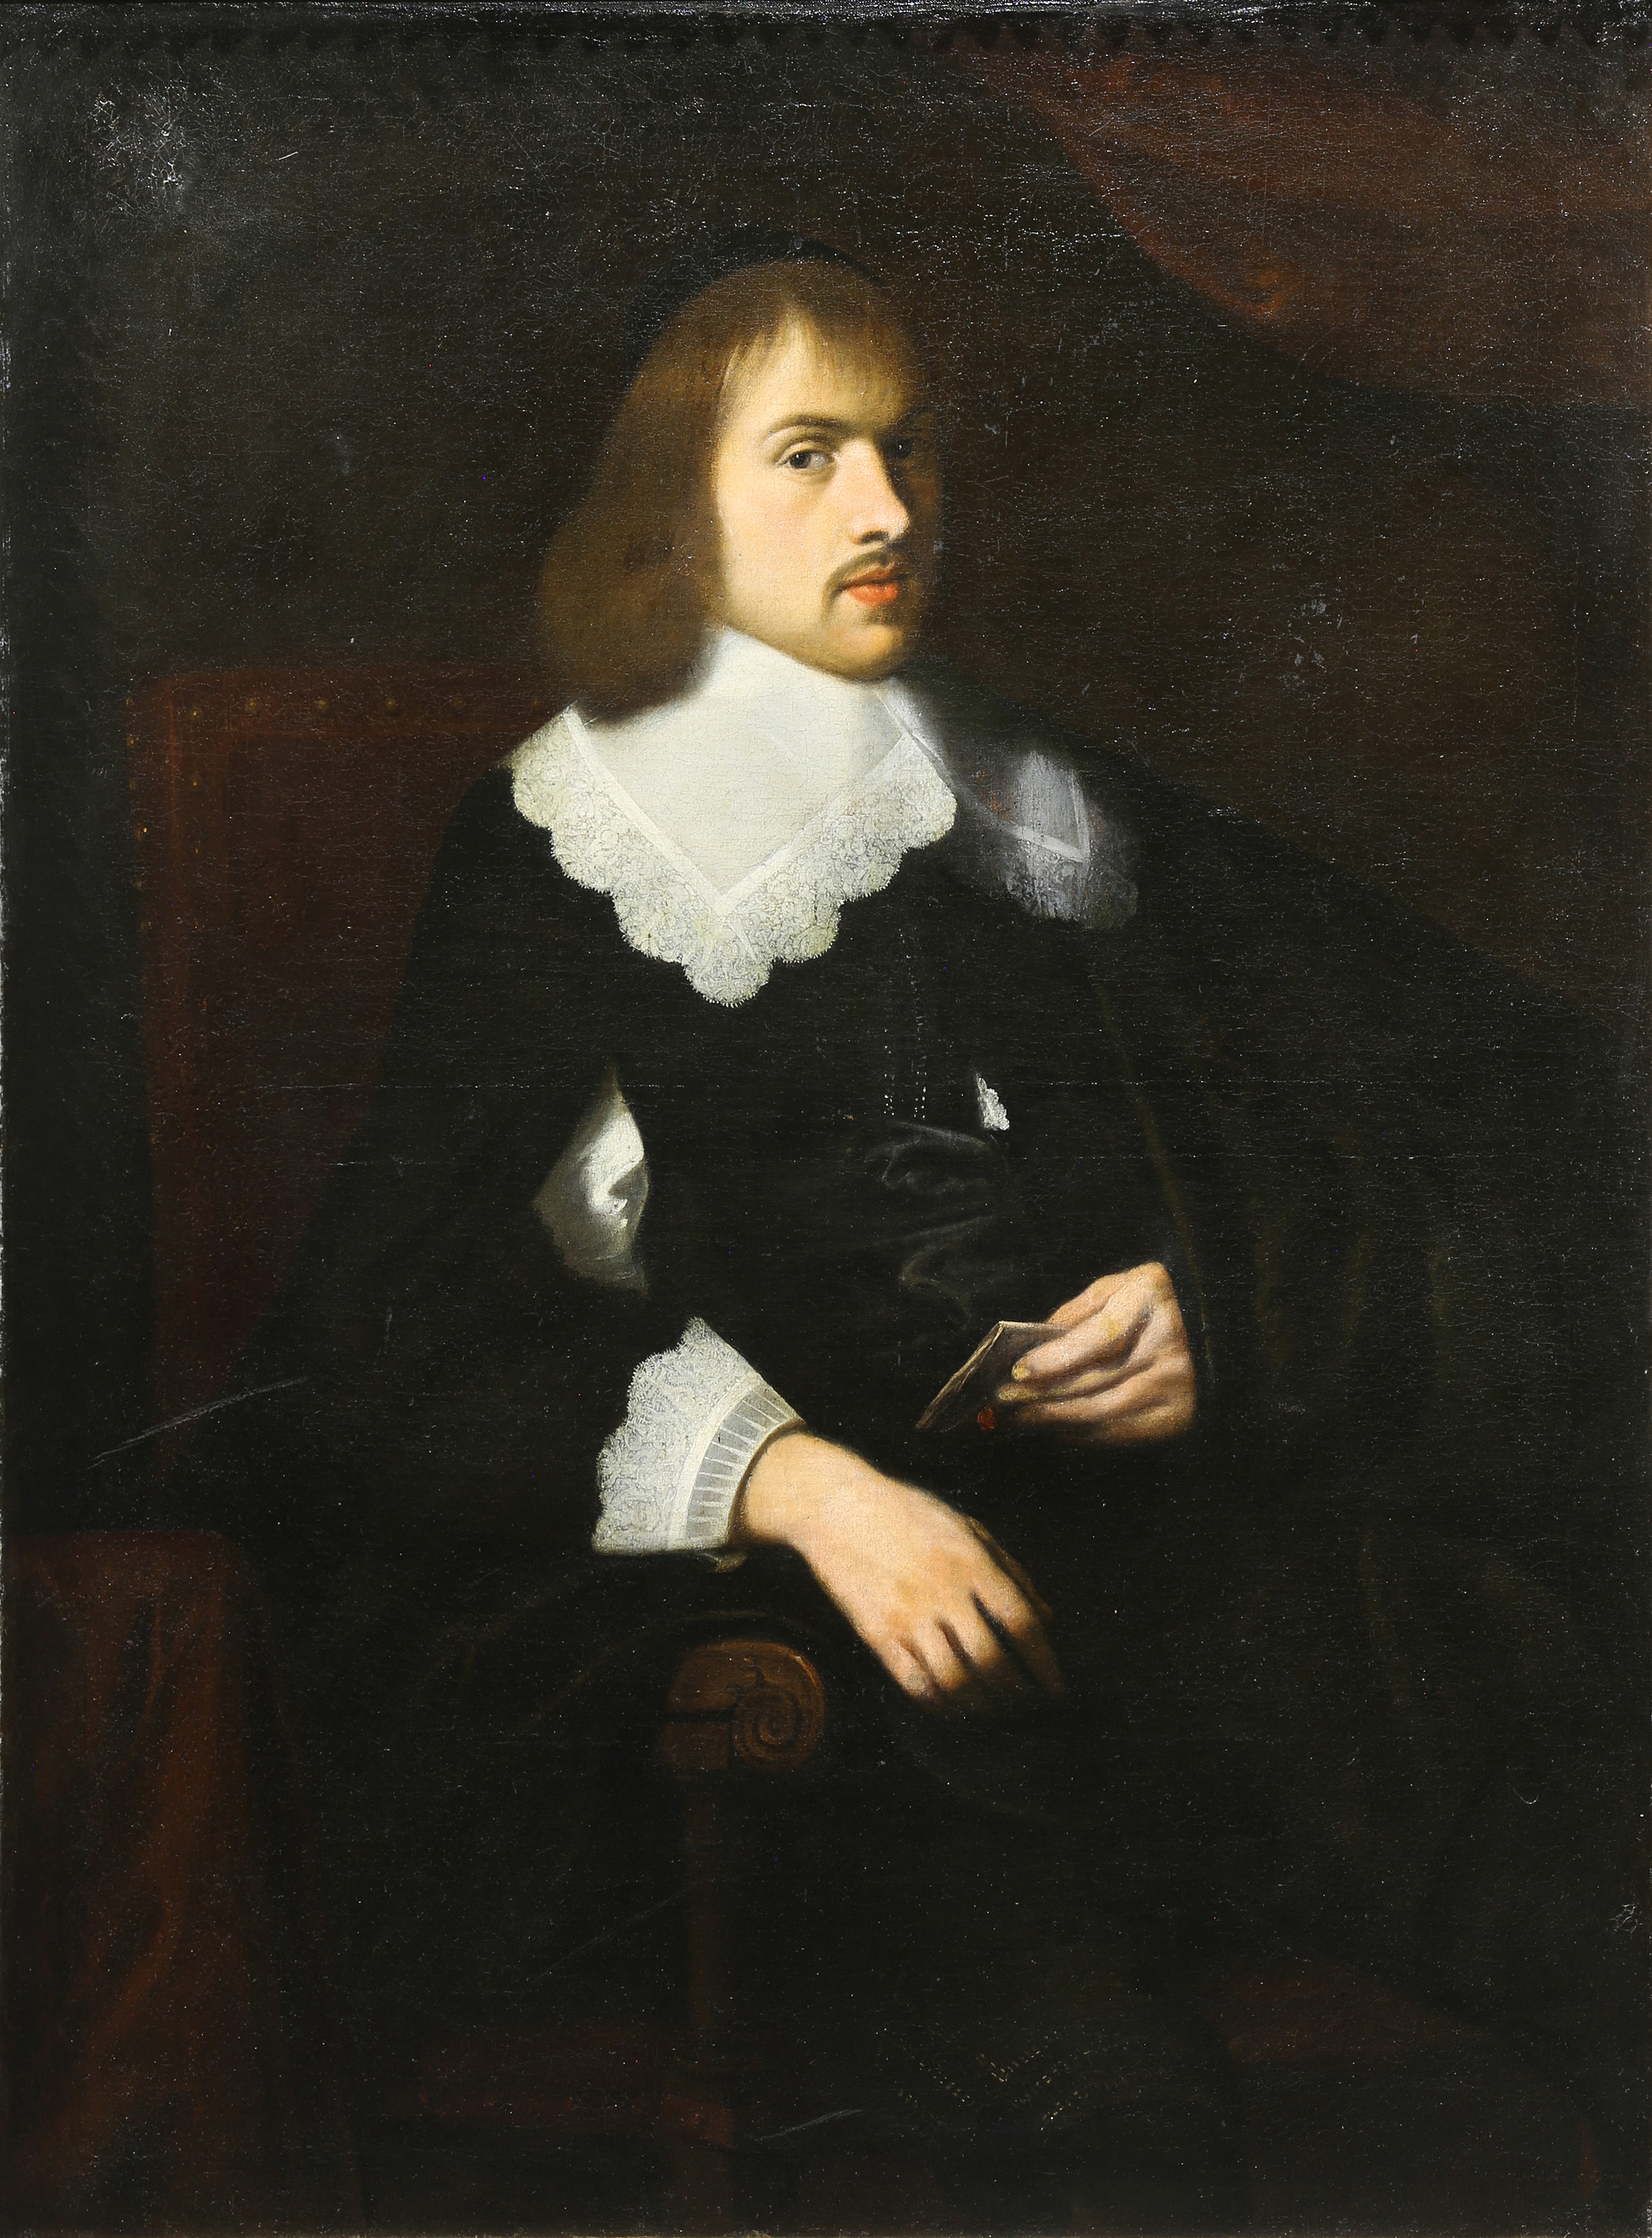 PAINTING ATTRIBUTED TO GEORGE 3a6915